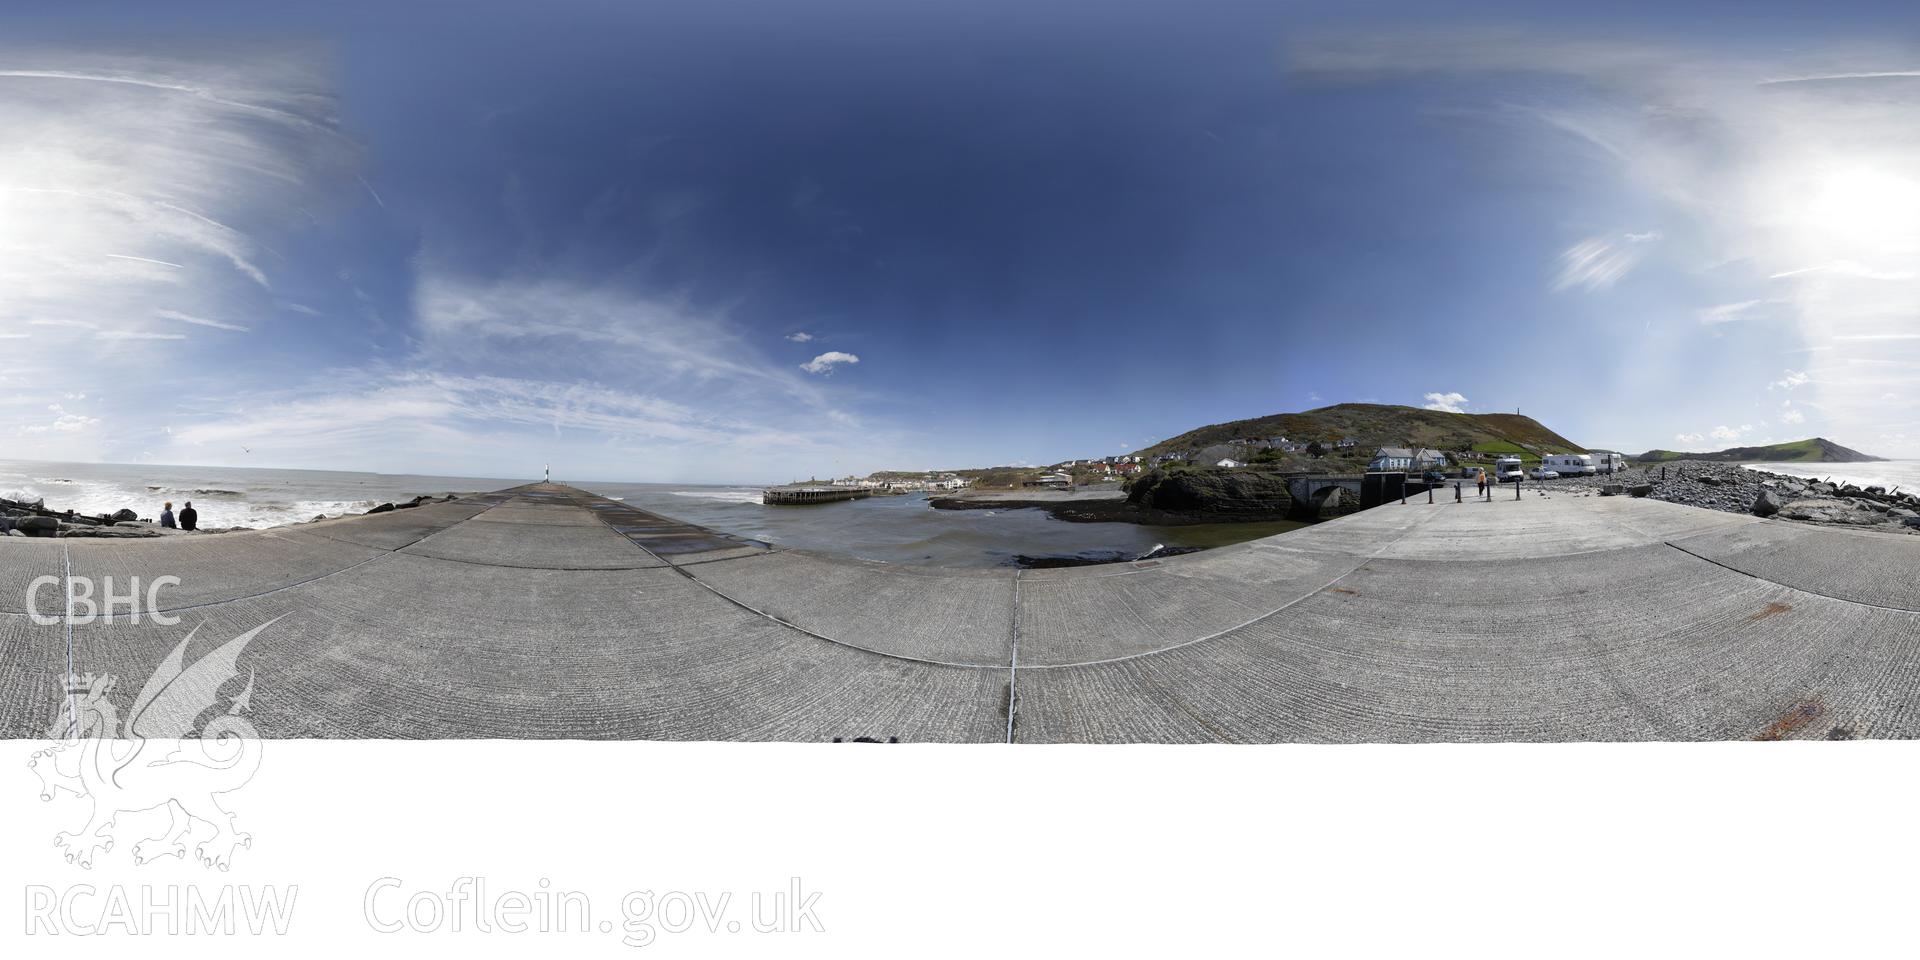 Reduced resolution Tiff of stitched images from the jetty to the harbour, Aberystwyth produced by Susan Fielding and Rita Singer, 2018. Produced through European Travellers to Wales project.